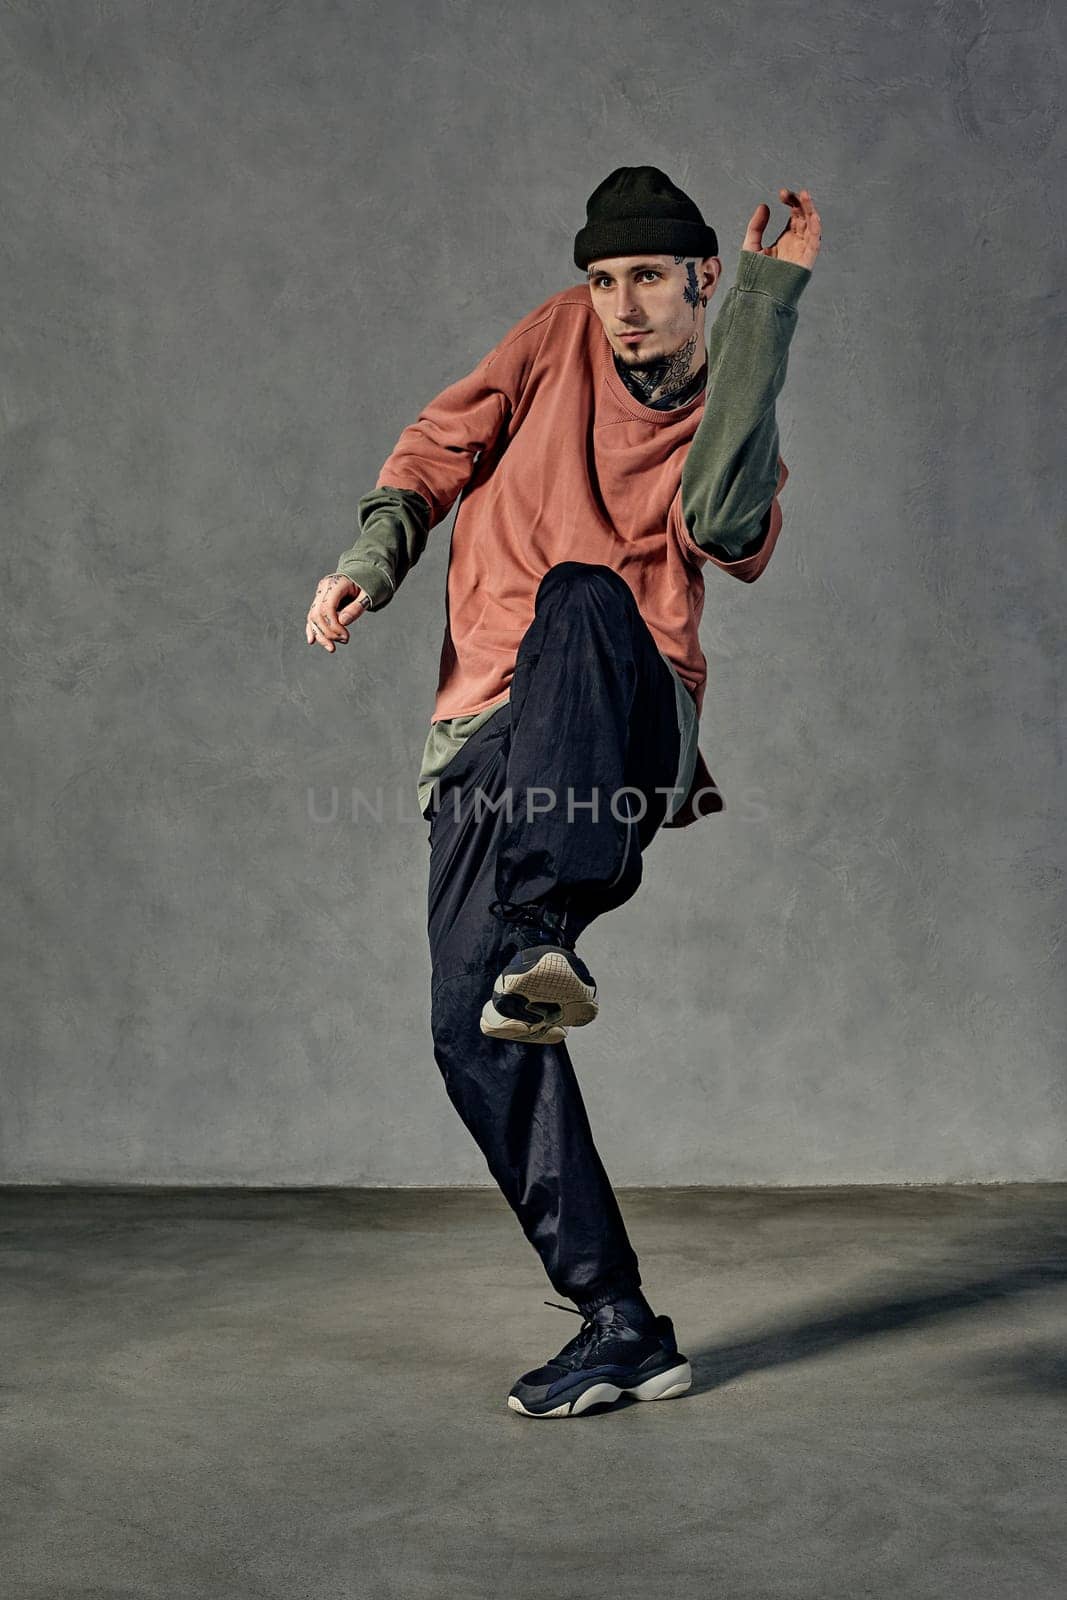 Strong fellow with tattooed body and face, earrings, beard. Dressed in hat, colorful jumper, black pants and sneakers. Dancing on gray background. Dancehall, hip-hop. Full length, copy space